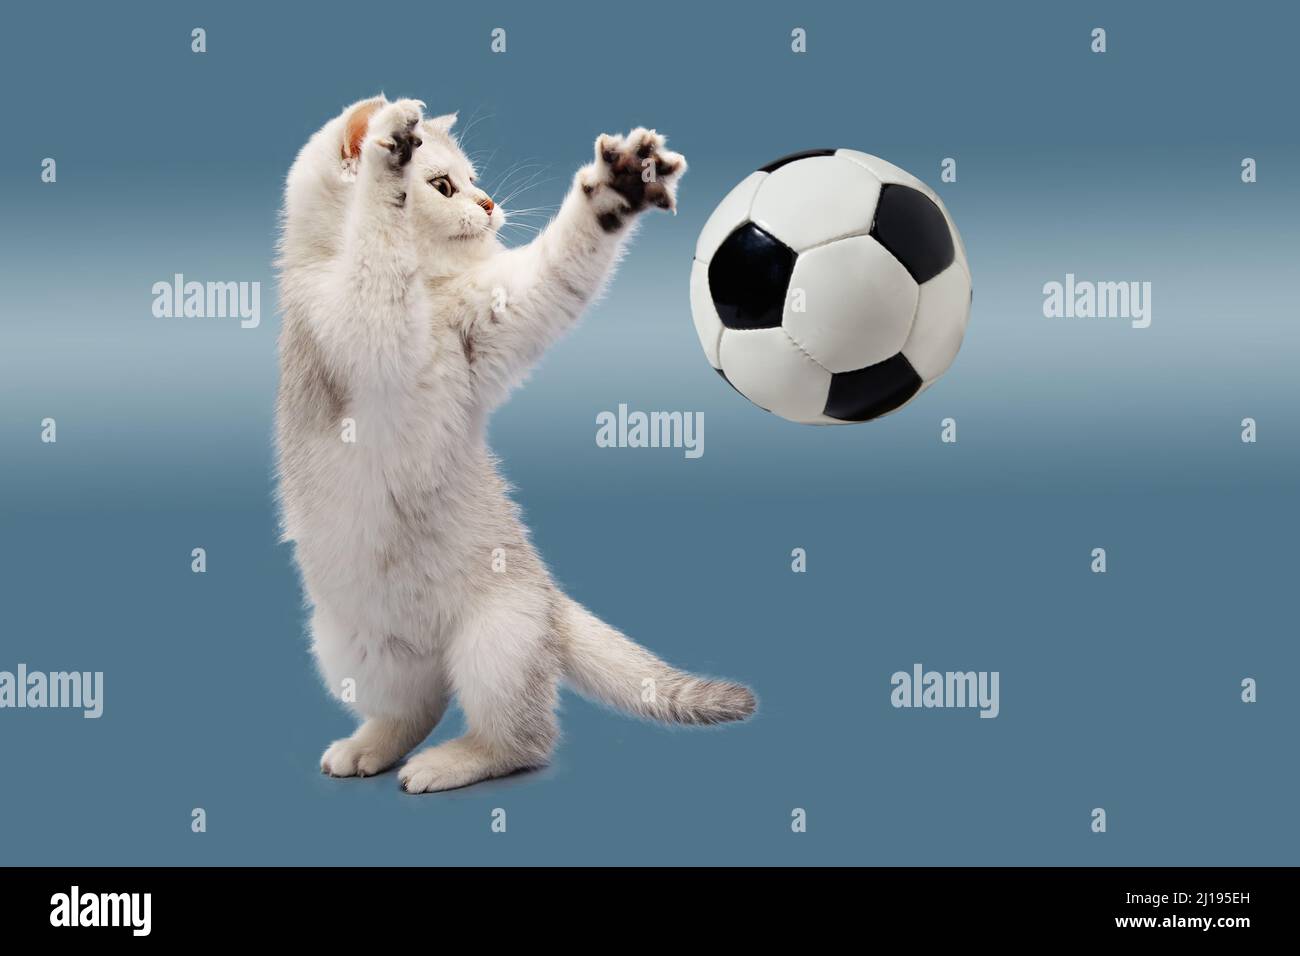 British kitten on a blue background plays with a soccer ball. Waiting for the World Cup. The concept of sports, physical activity and healthy lifestyl Stock Photo